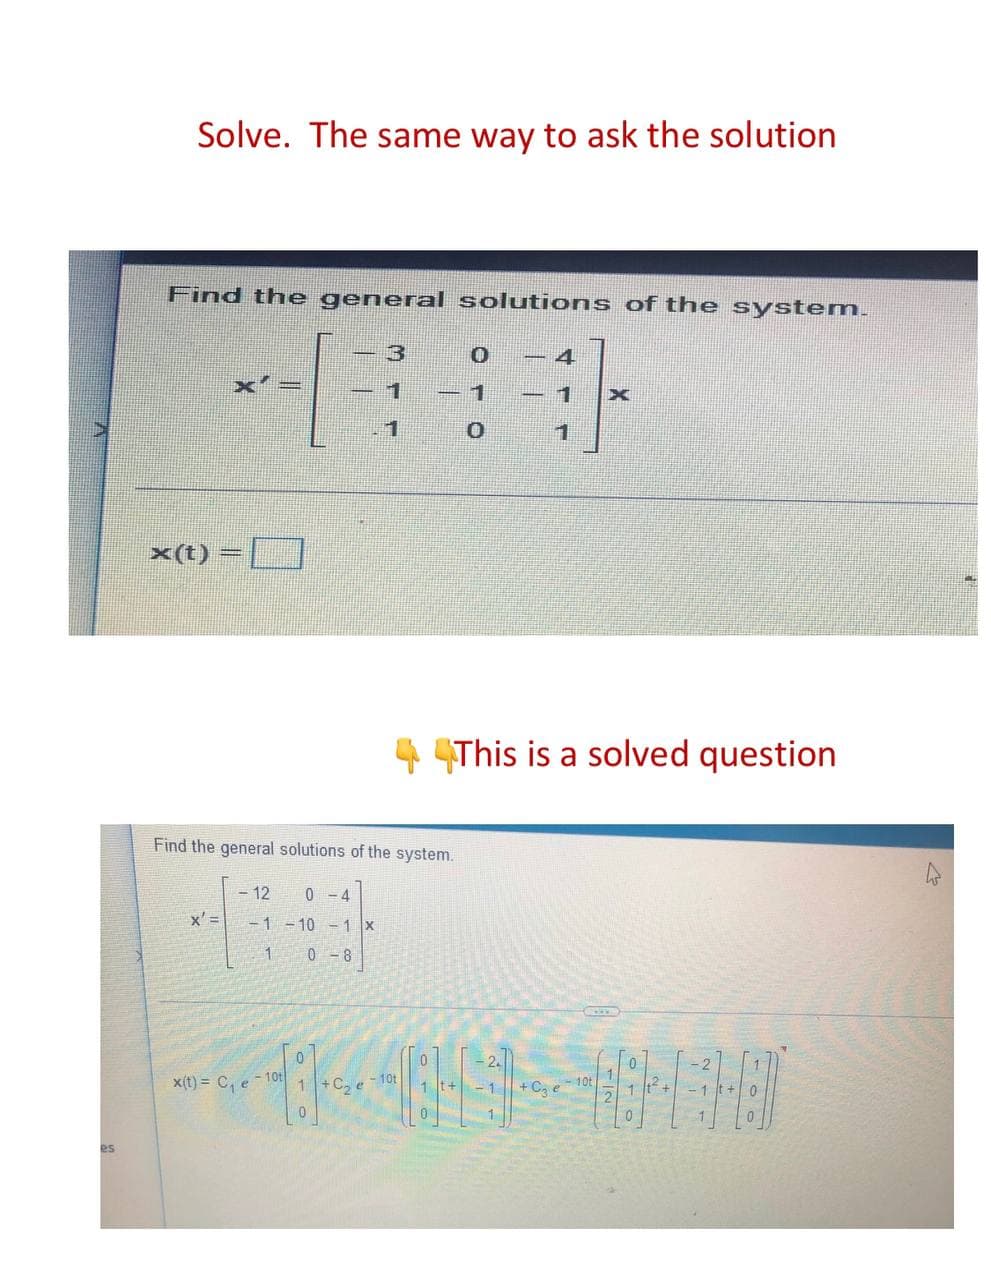 es
Solve. The same way to ask the solution
Find the general solutions of the system.
x(t)
This is a solved question
Find the general solutions of the system.
- 12 0-4
x' = -1 -10 -1 x
1/1
1 0-8
0
2
x(t)= C₁ e 10t
1:1...
+C₂ e
-1-
1 +
0
1
- 10t
+ C36
10t
2
0
1
0
4